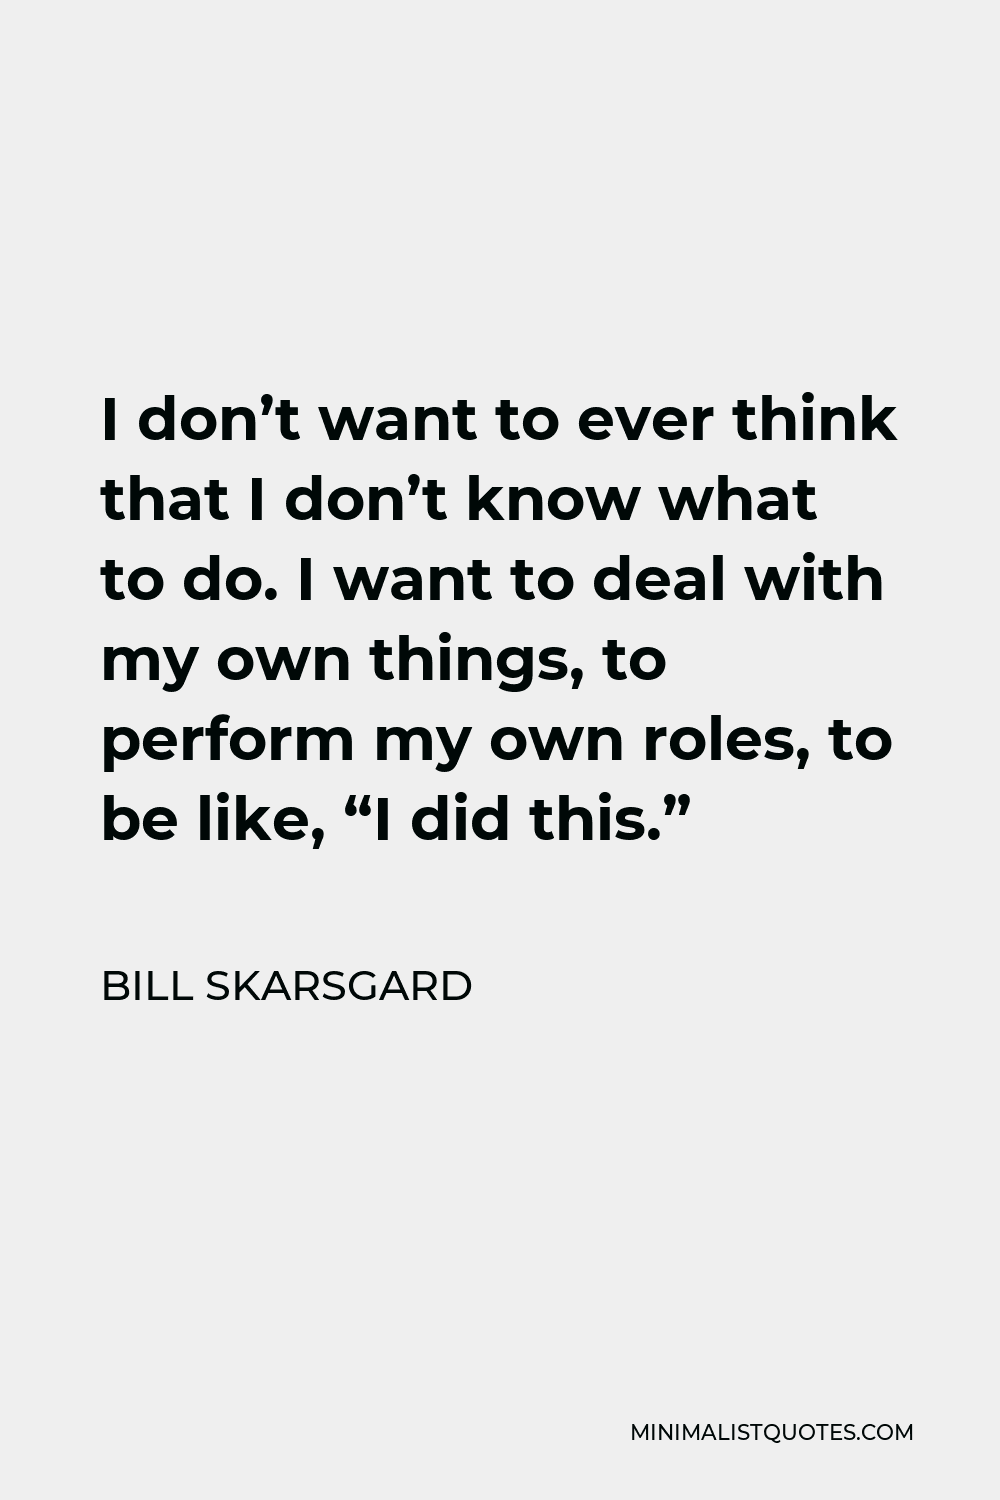 Bill Skarsgard Quote - I don’t want to ever think that I don’t know what to do. I want to deal with my own things, to perform my own roles, to be like, “I did this.”